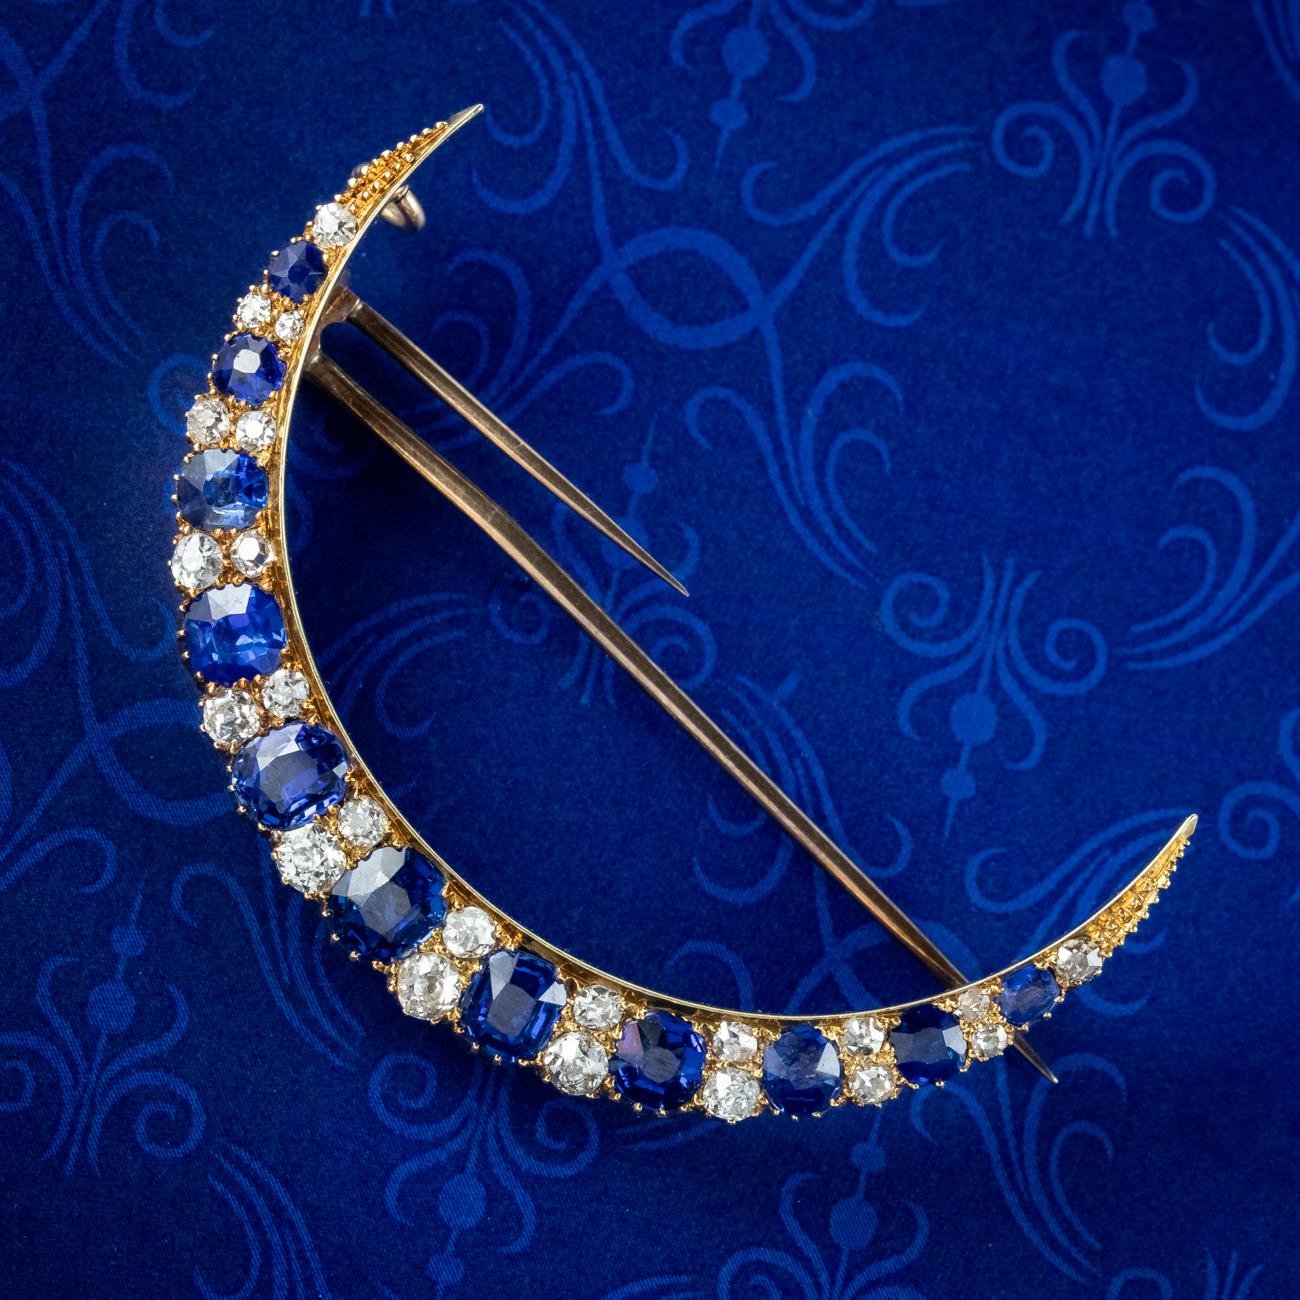 A stunning antique Victorian crescent moon brooch from the late 19th Century adorned with alternating cushion cut blue sapphires and old mine cut diamonds that graduate in size toward the centre. The sapphires have a beautiful royal blue hue and